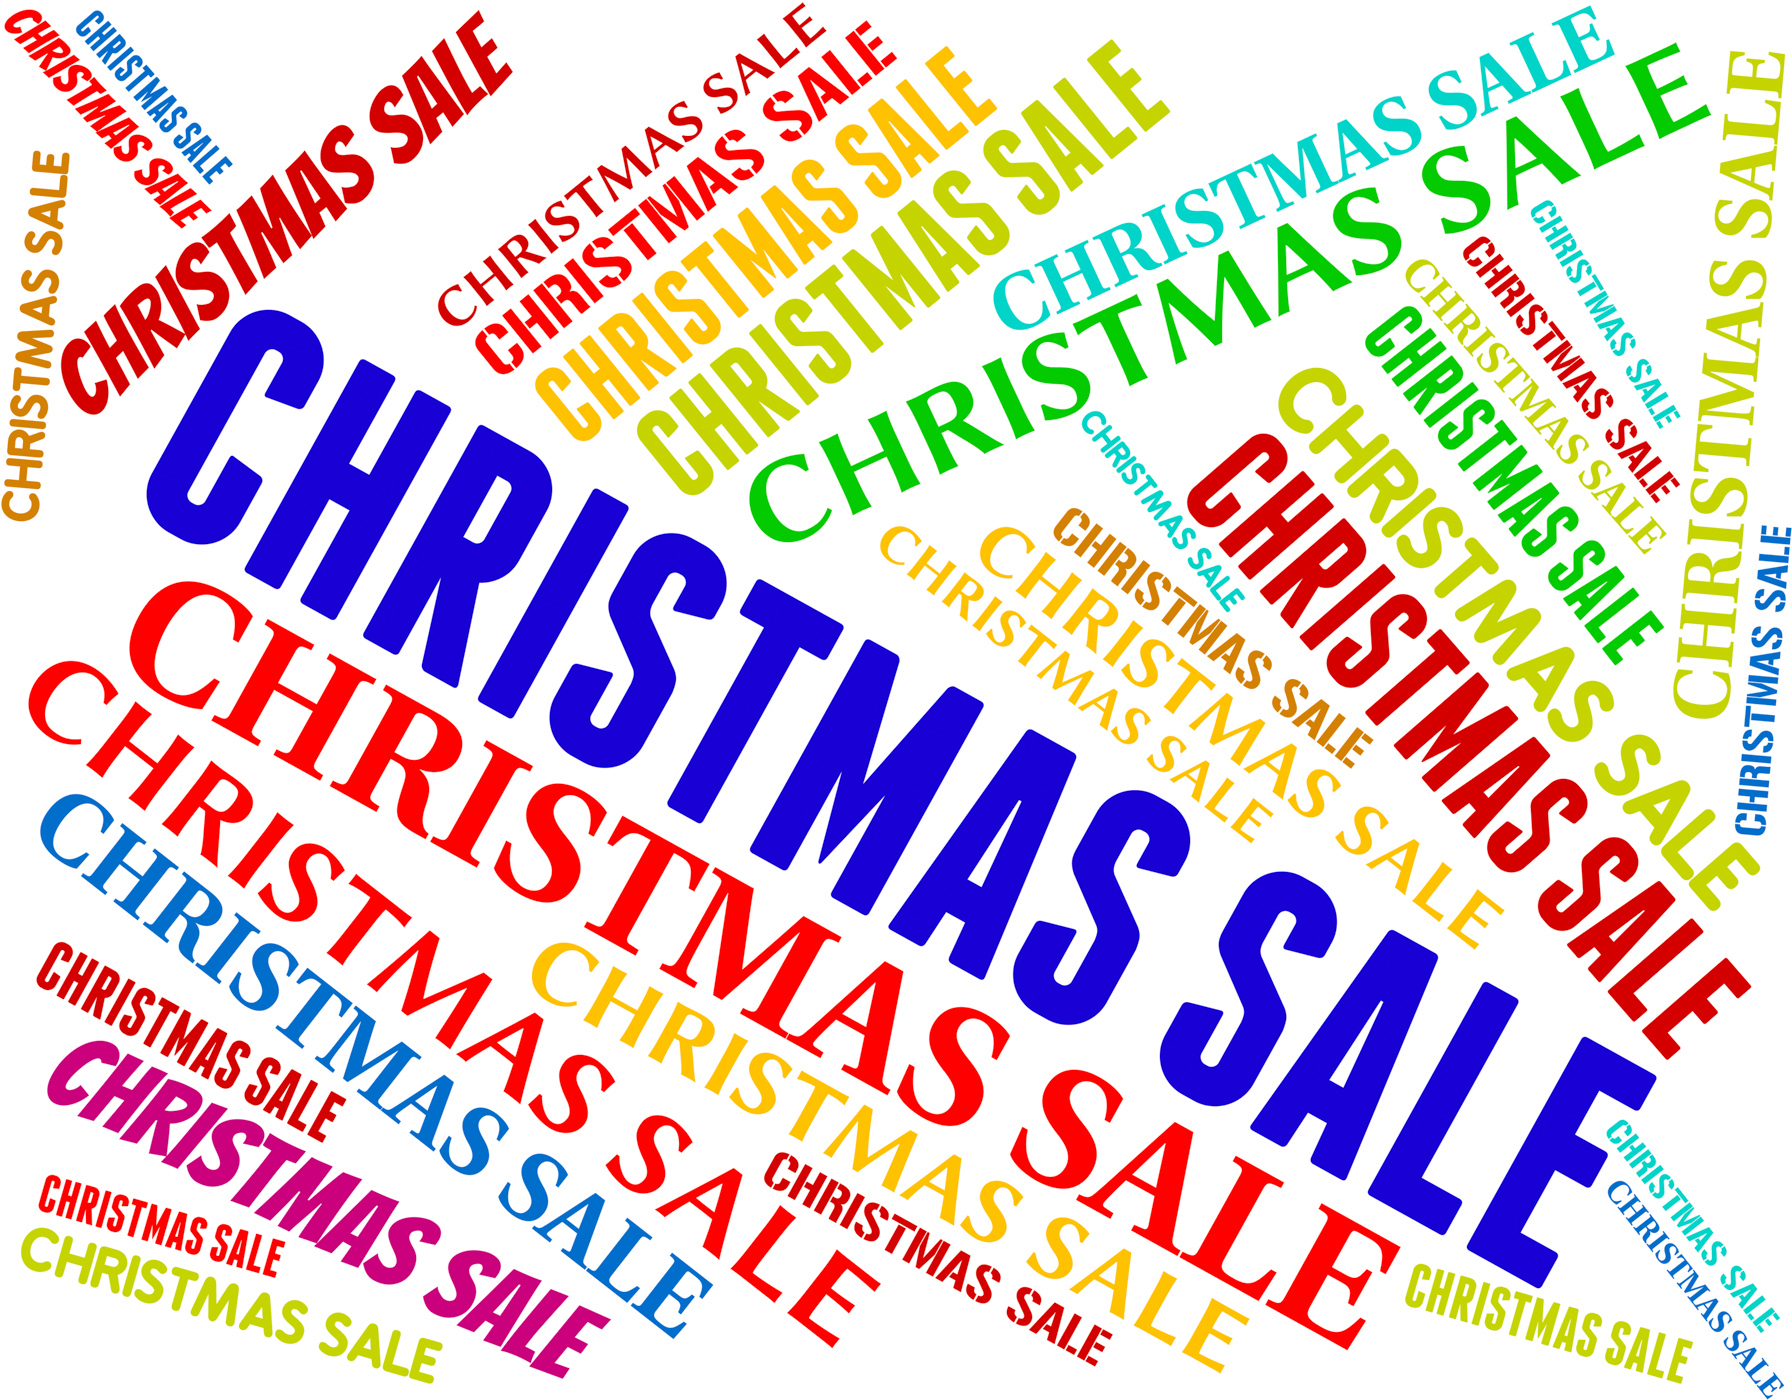 Christmas sale represents bargain save and text photo